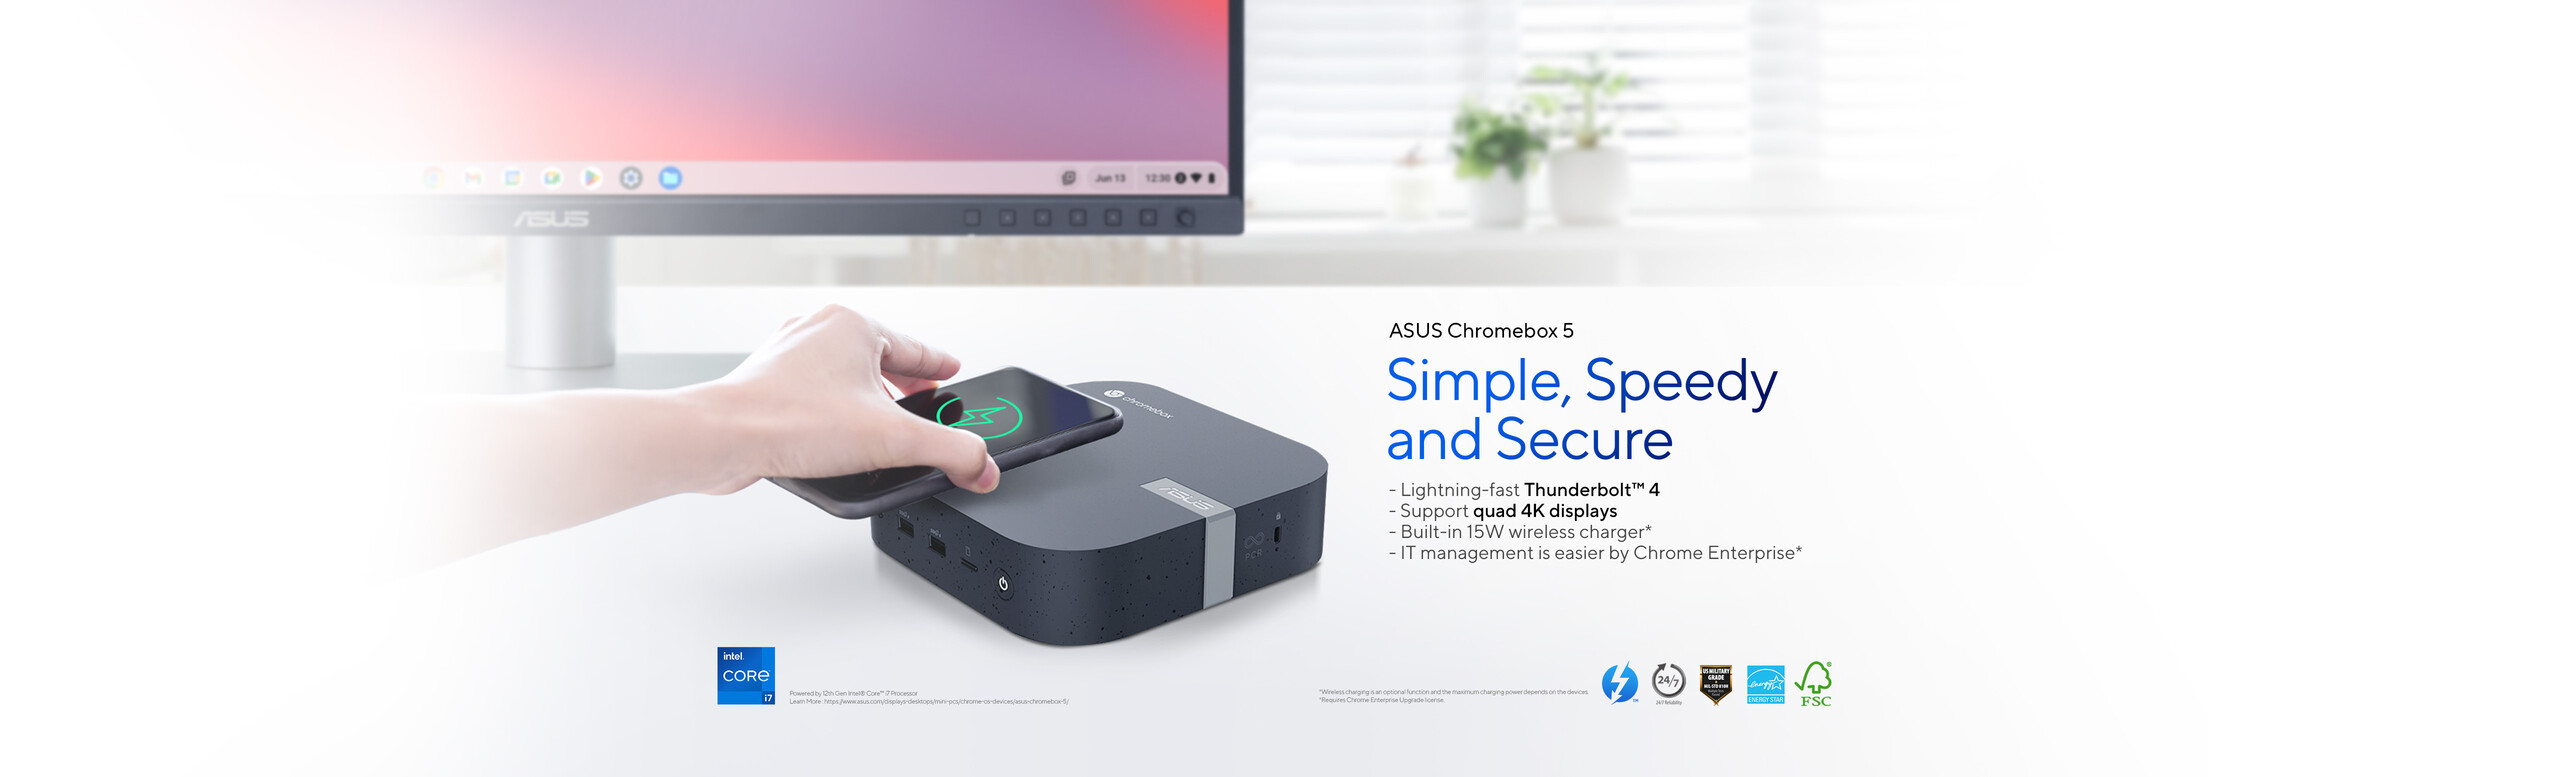 Learn more about ASUS Chromebox 5 features